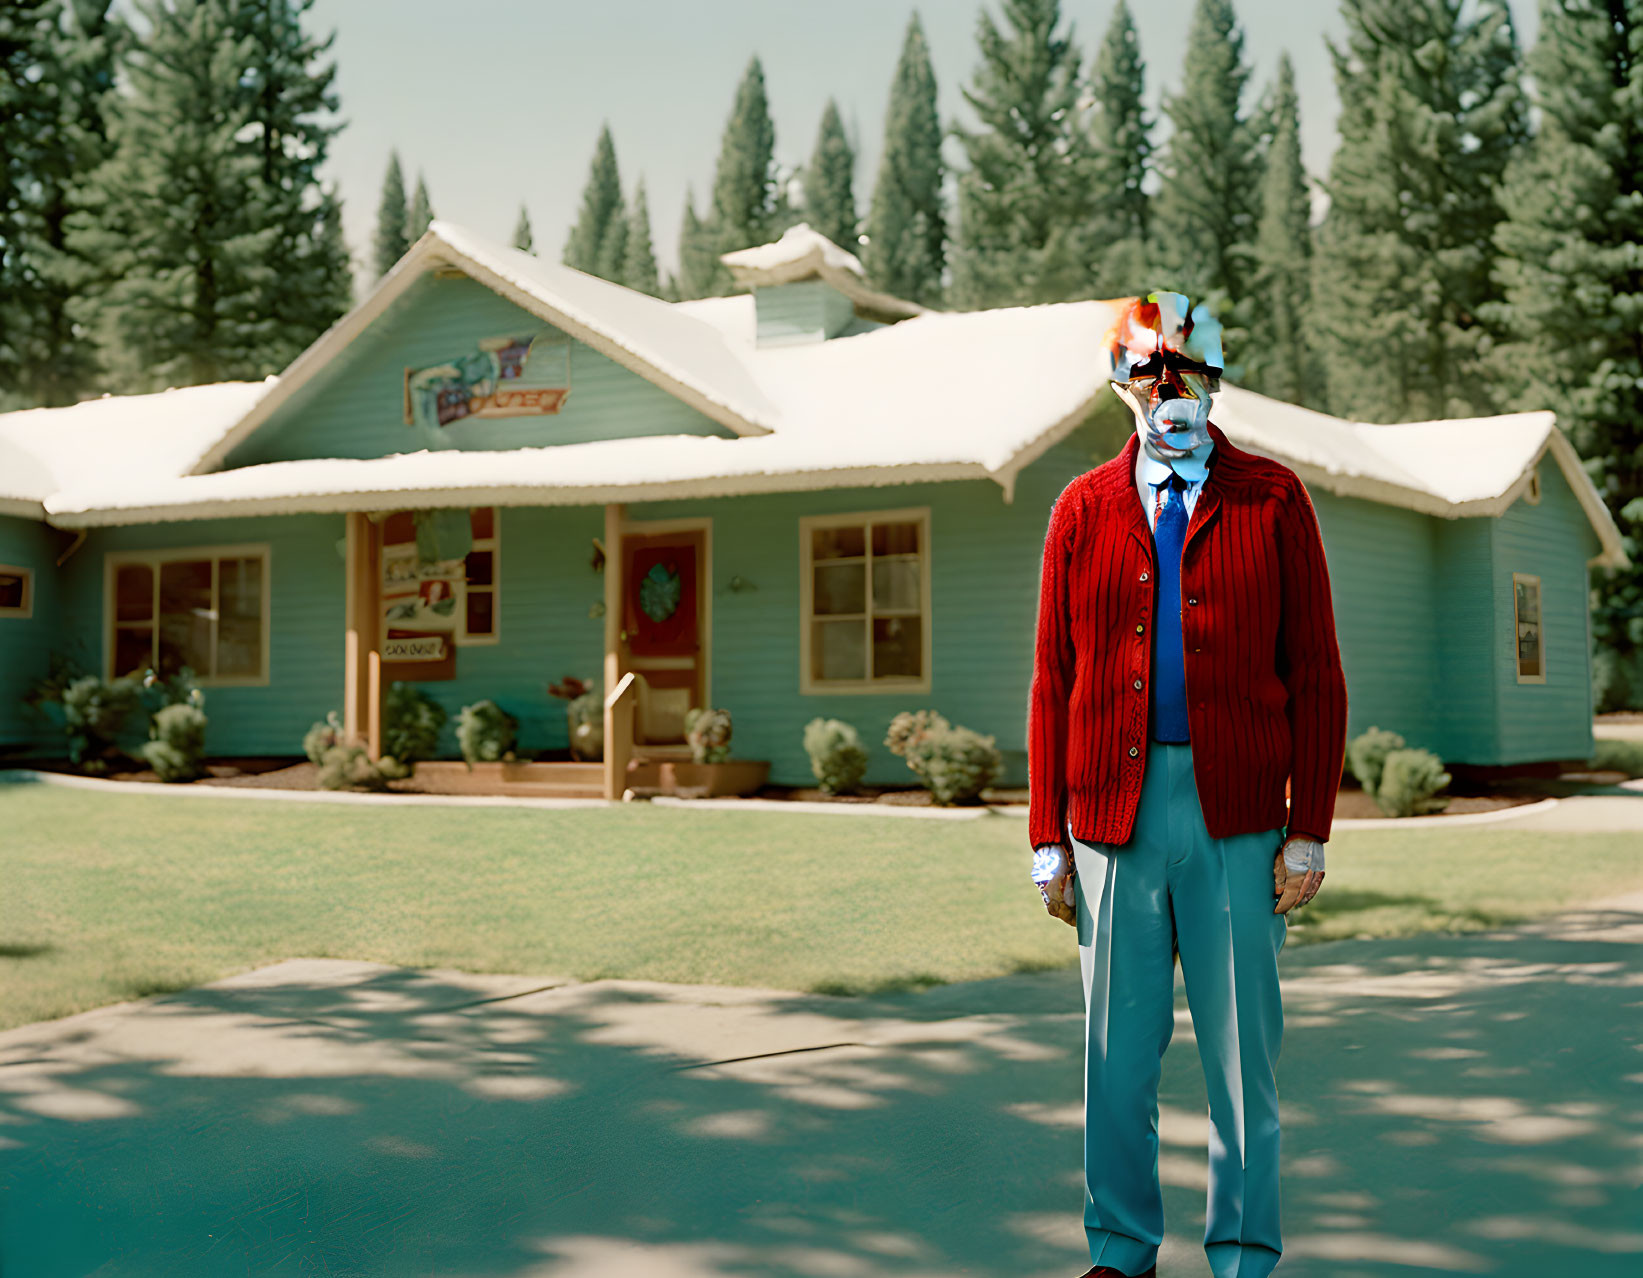 Clown in front of "Deer Lodge" house in sunny setting